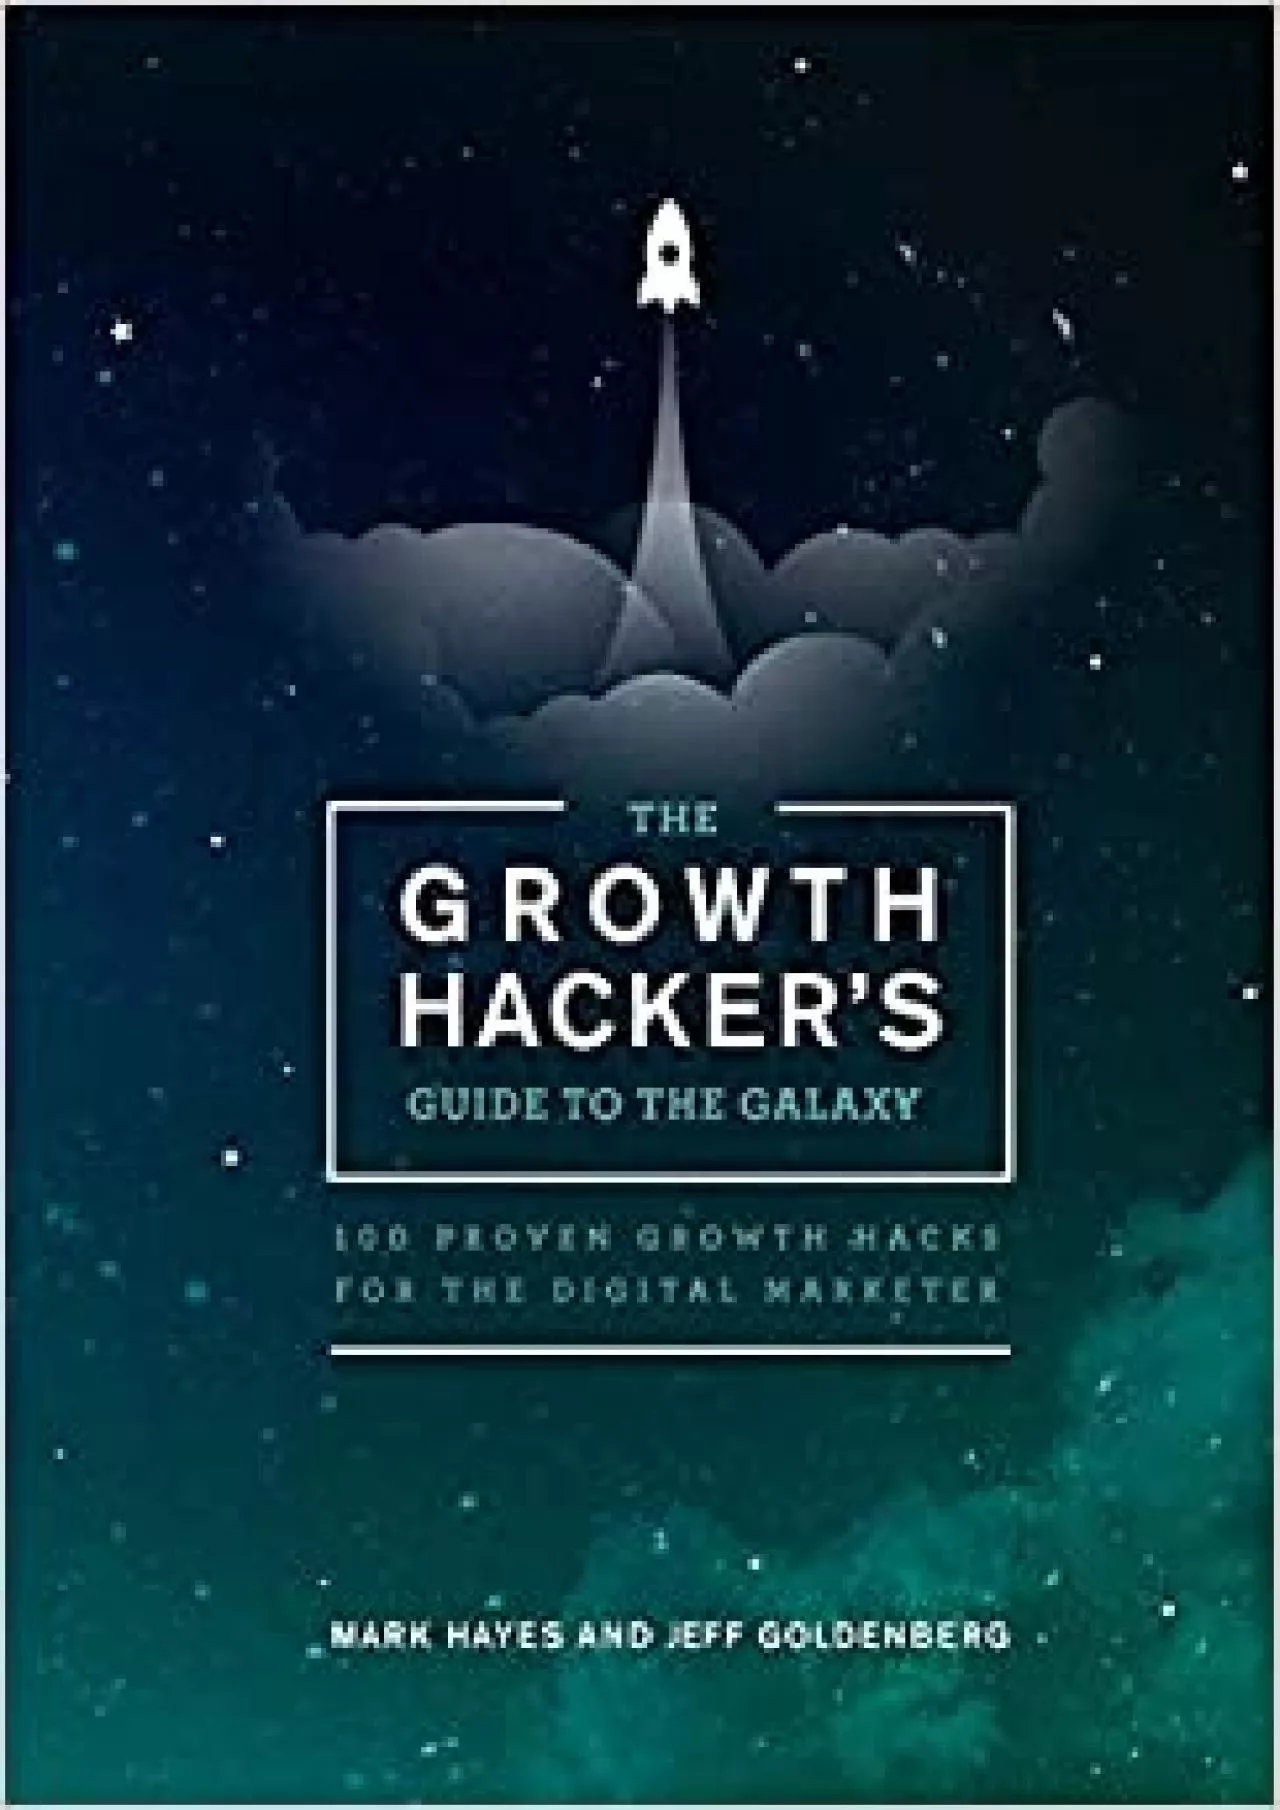 The Growth Hackers Guide to the Galaxy 00 Proven Growth Hacks for the Digital Marketer